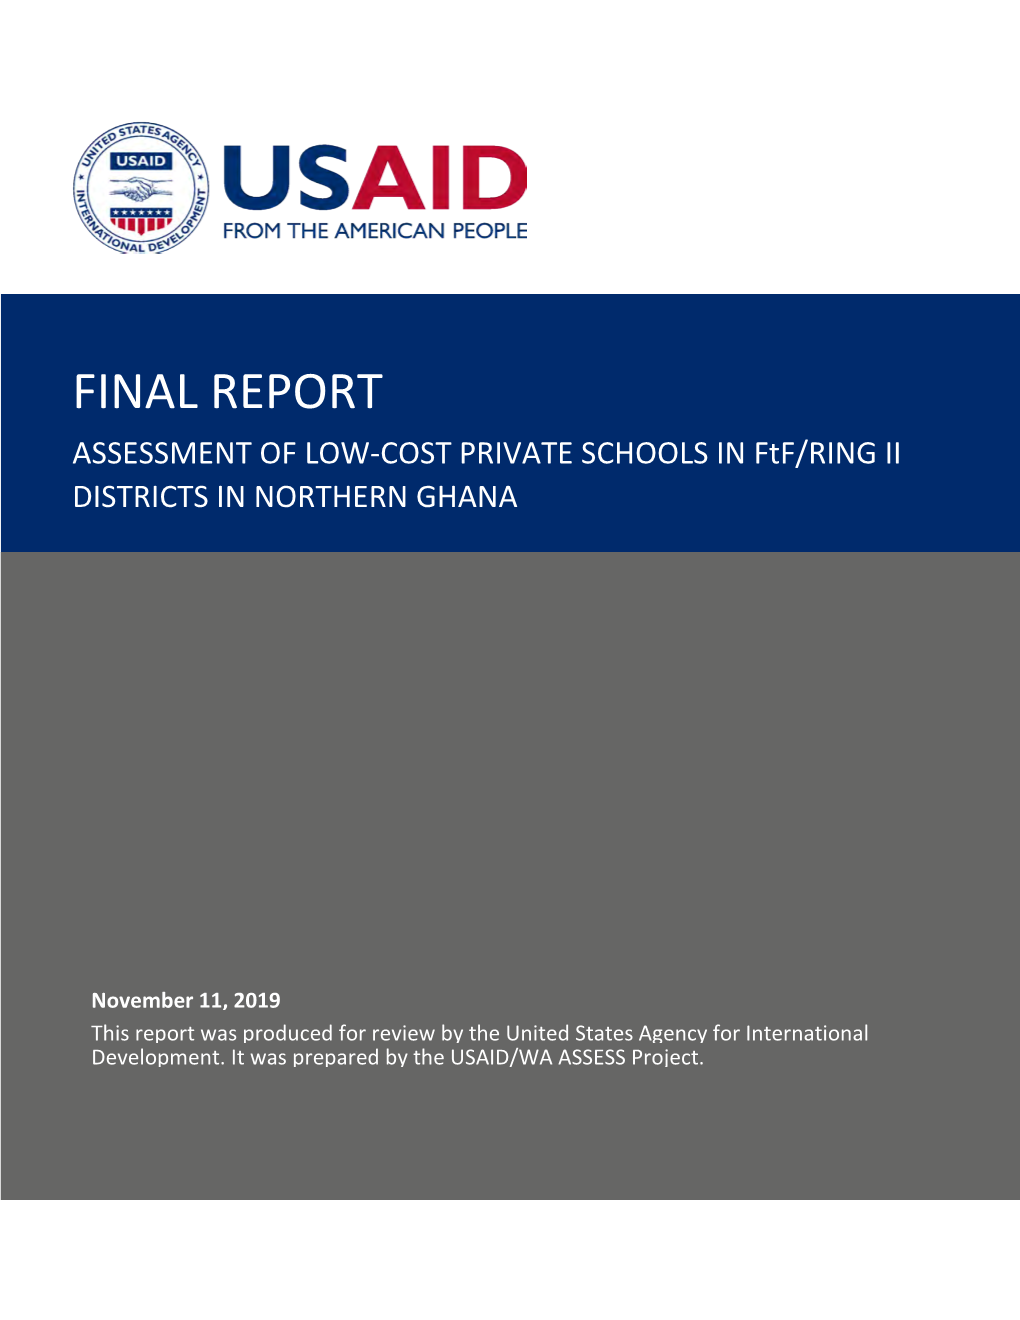 FINAL REPORT ASSESSMENT of LOW-COST PRIVATE SCHOOLS in Ftf/RING II